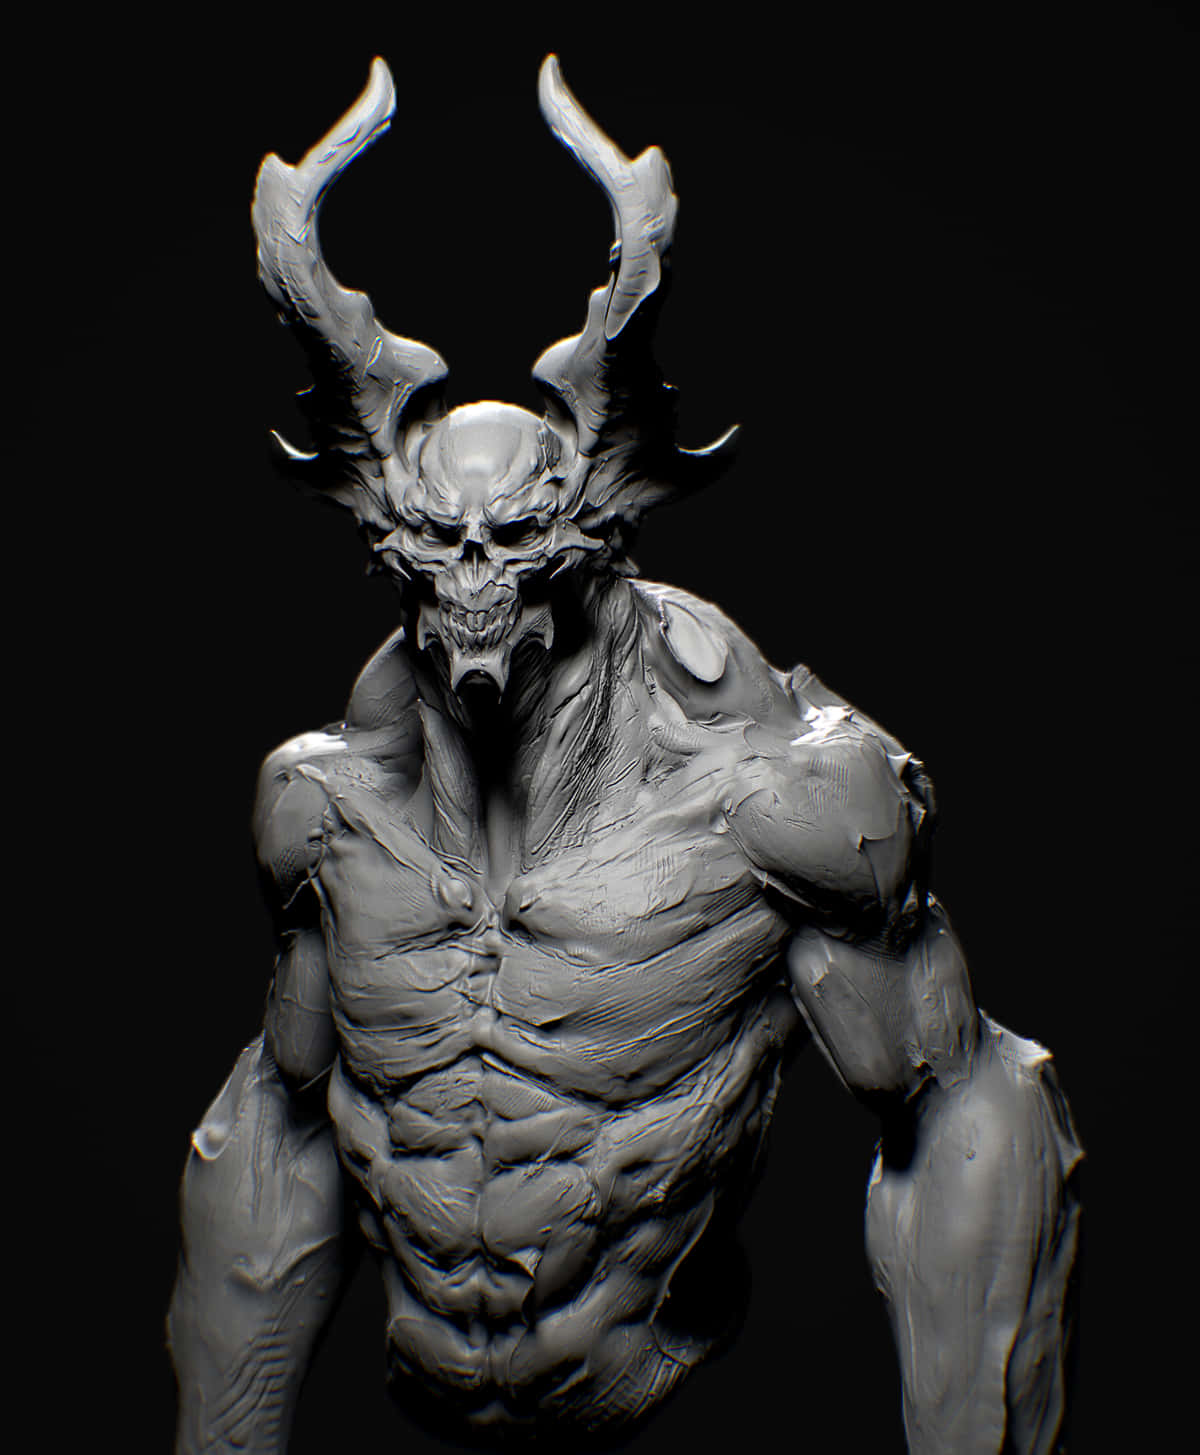 A 3d Model Of A Demon With Horns